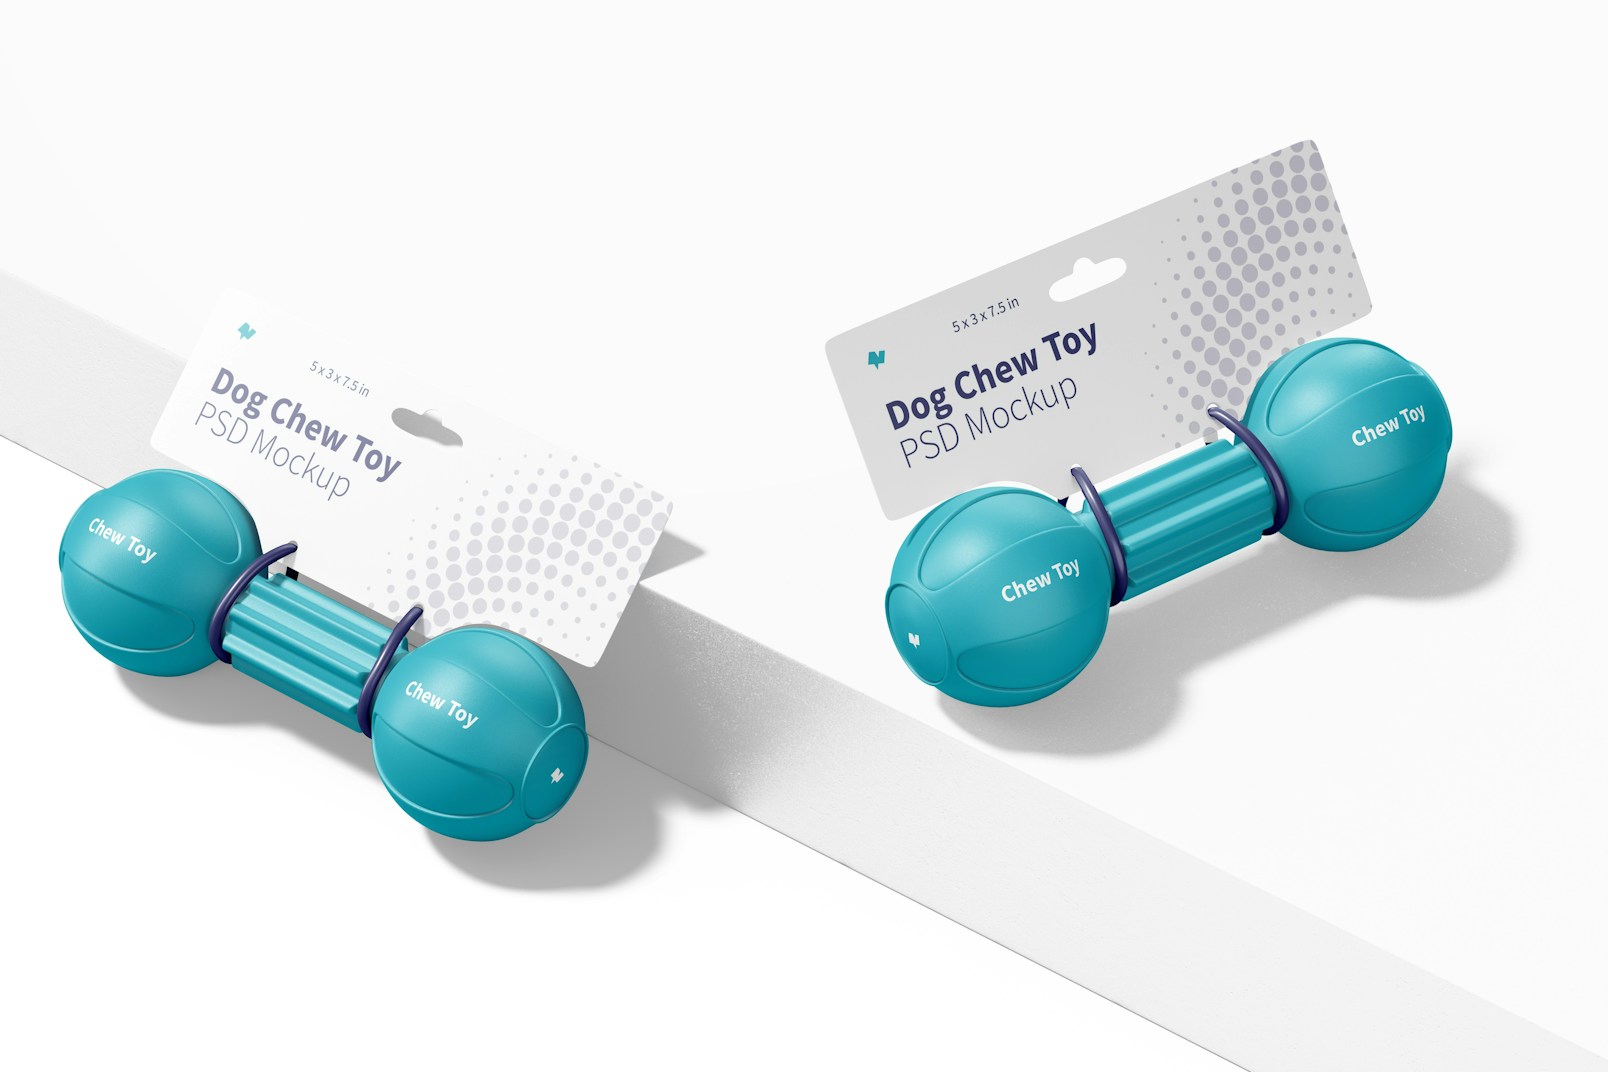 Dog Barbell Chew Toys Packaging Mockup, Right and Left View